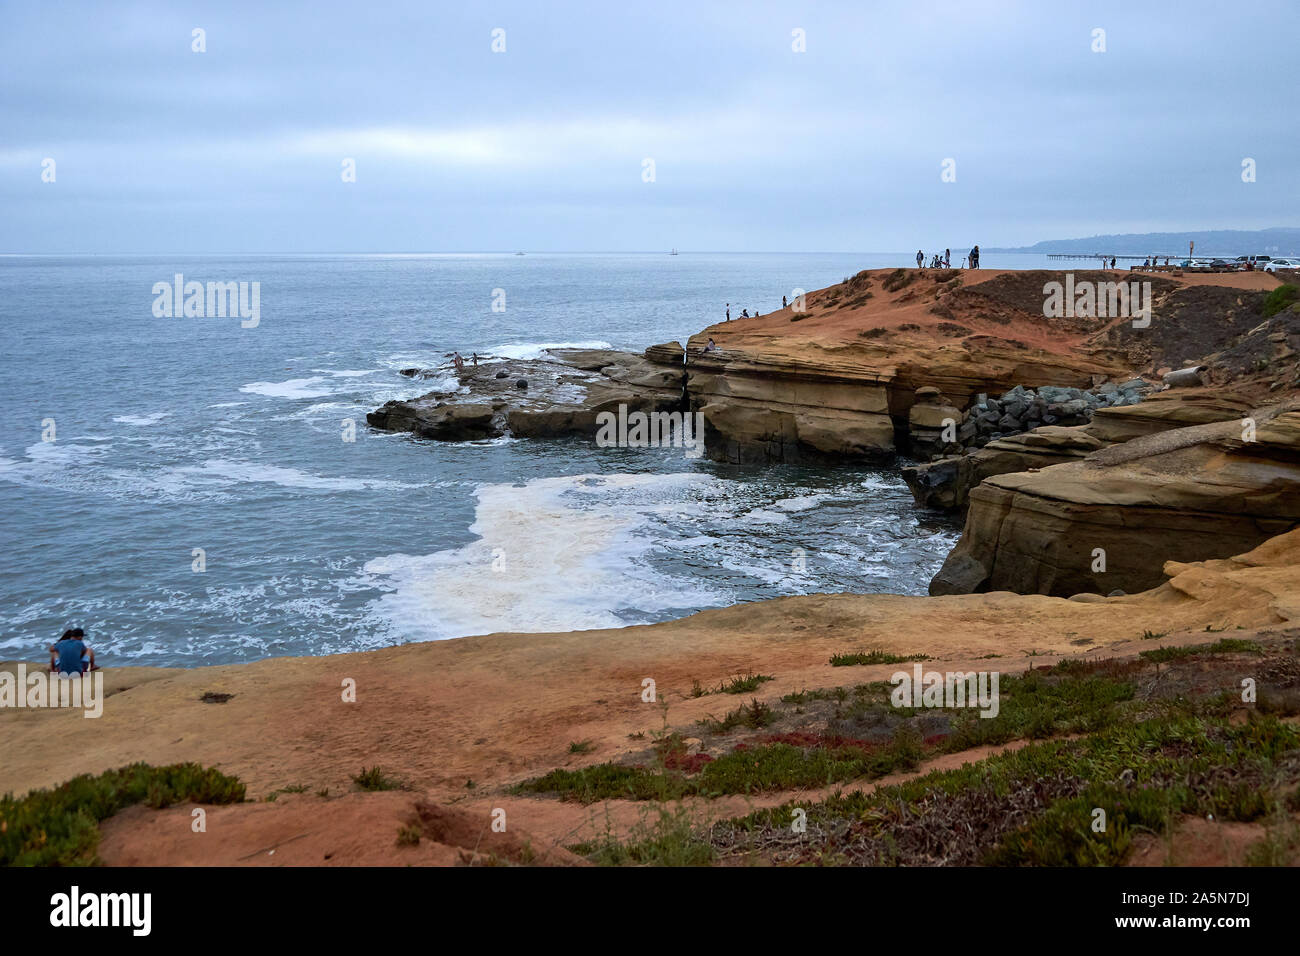 A multitude of people, tourists, including a couple, standing, walking or sitting on beach cliffs at Sunset Cliffs, San Diego, California Stock Photo